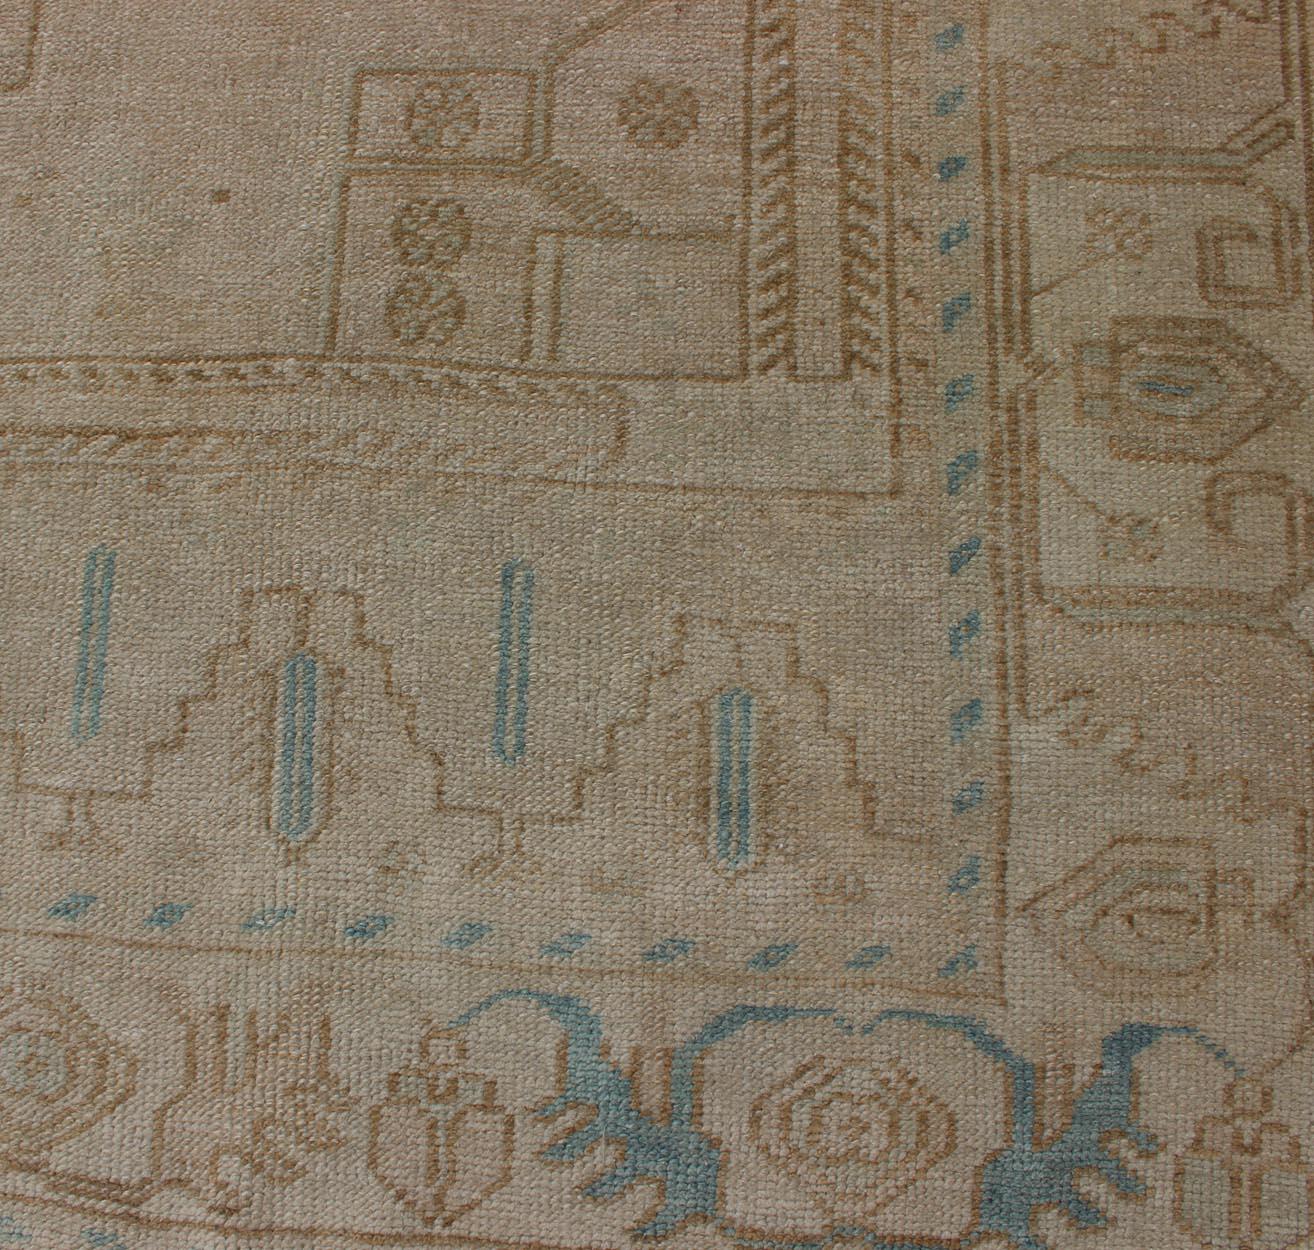 Vintage Turkish Gallery Rug in Earth Tones & Light Brown with Medallions  For Sale 2